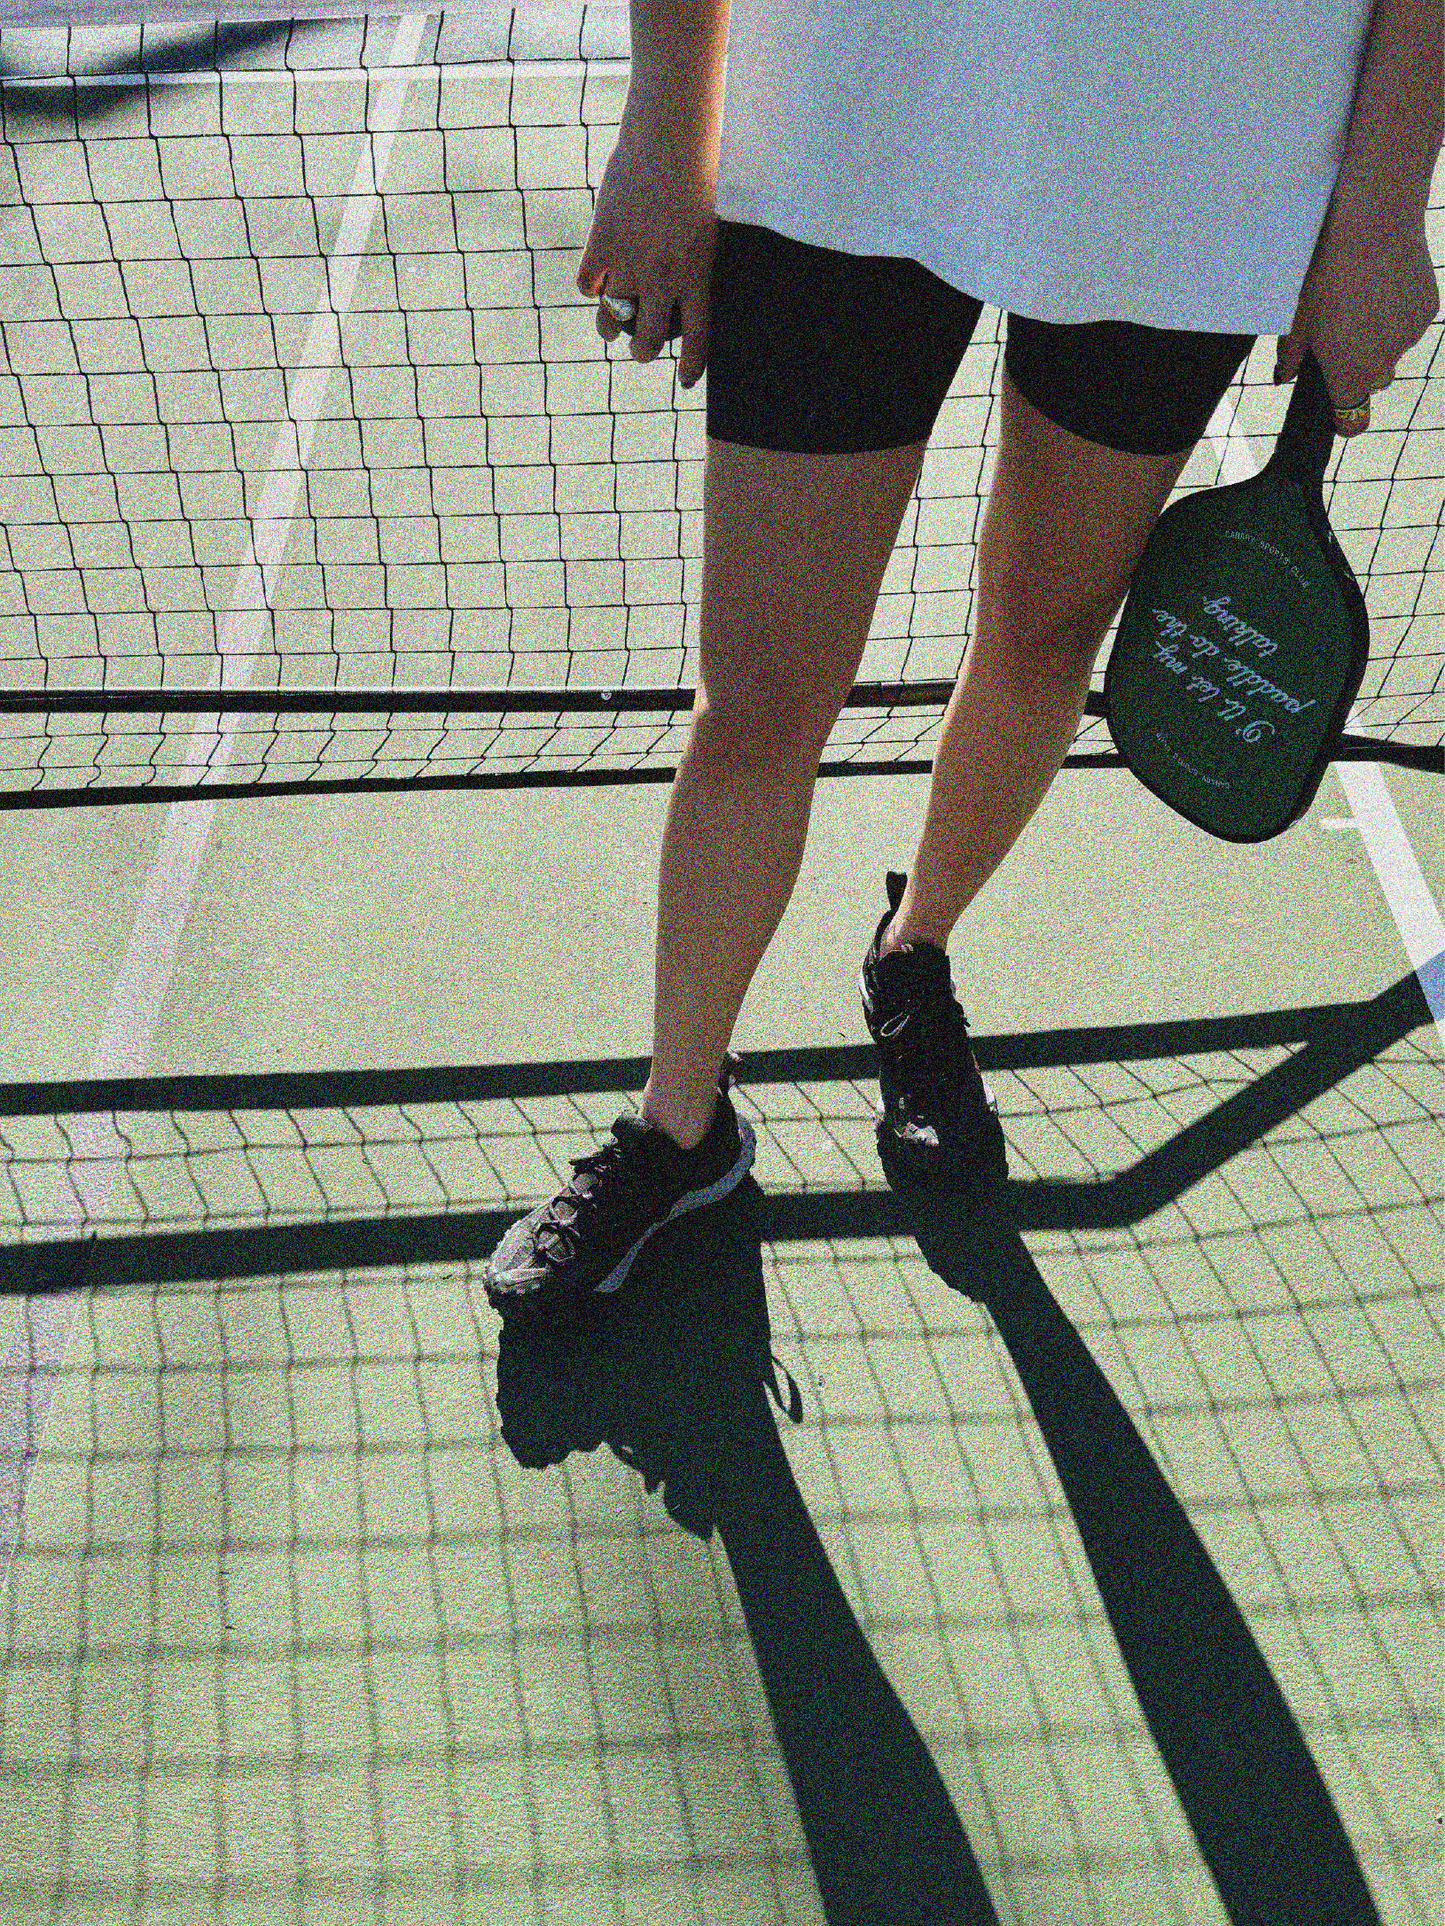 03. THE CANARY PICKLEBALL SET